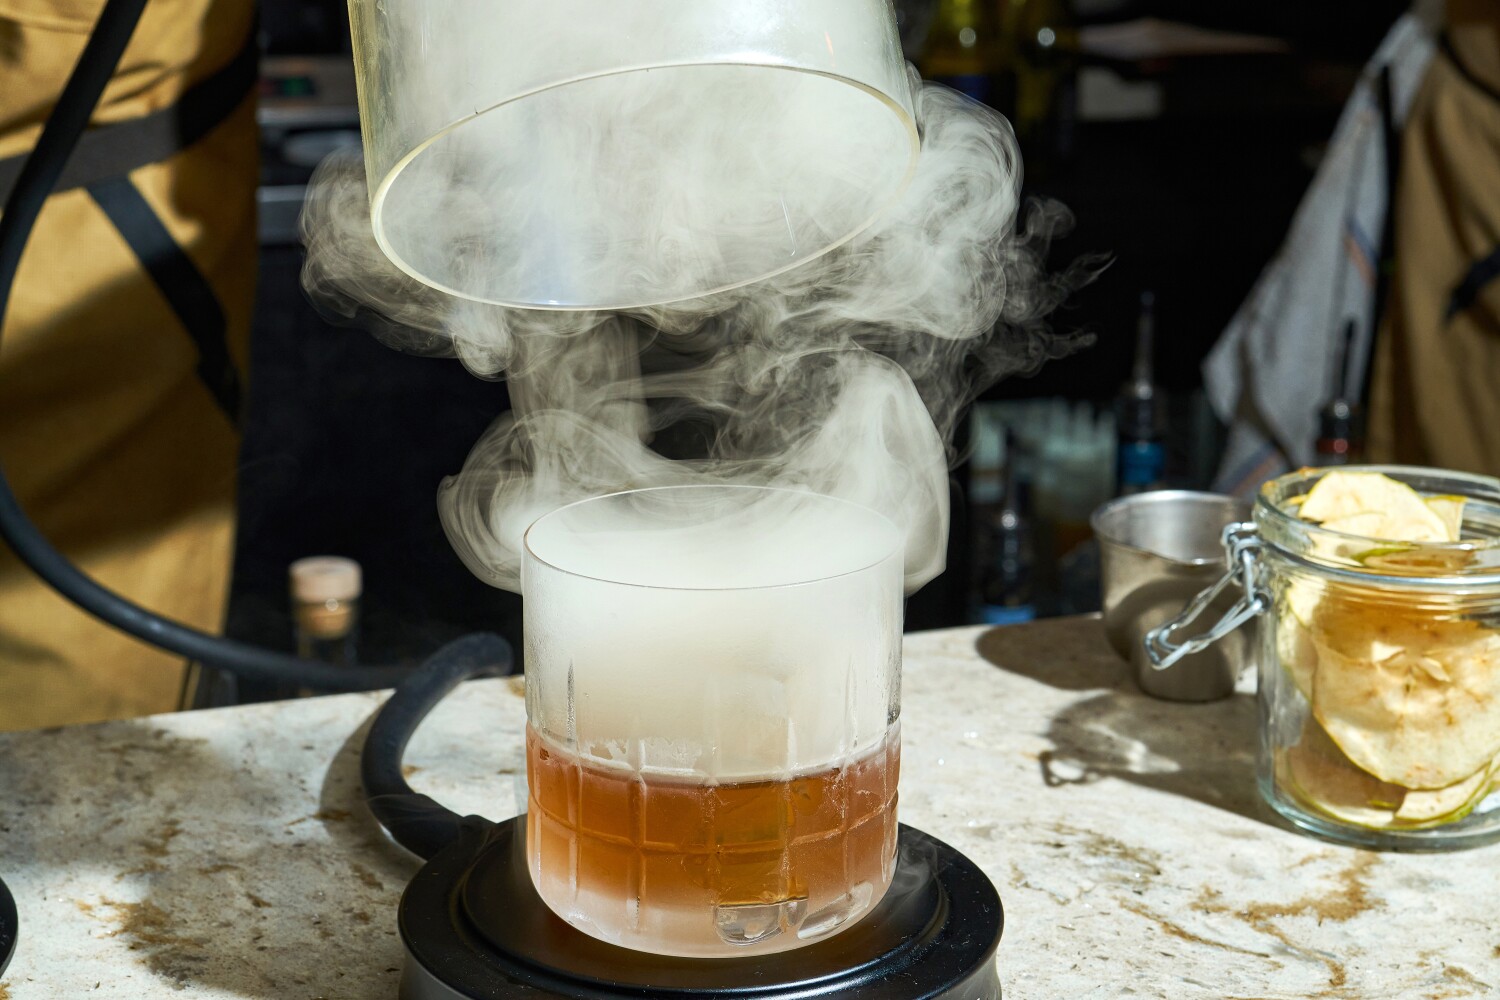 This new, smoky $26 cocktail is made with a gravity bong. Yes, really